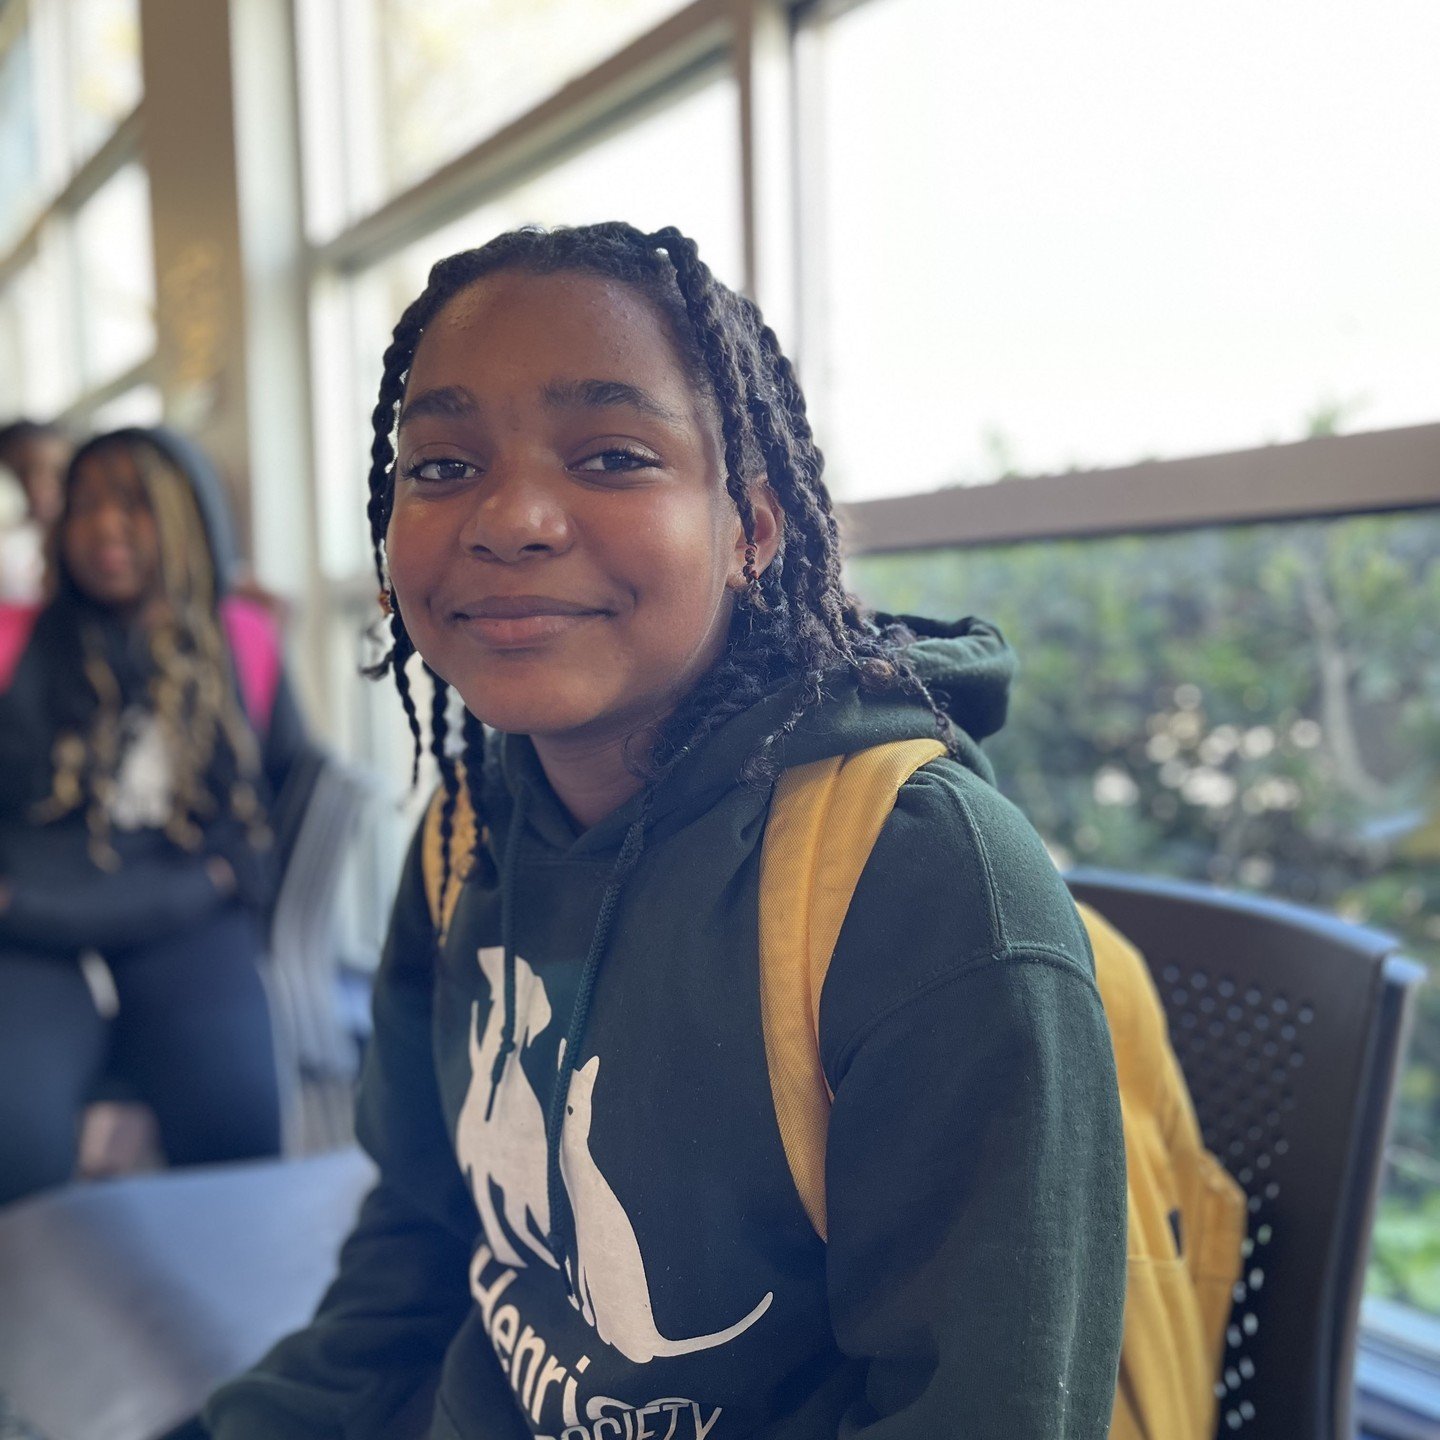 Angel, a Northside Club member, loves writing -- especially fiction. Currently, she's working on a story about a vampire. What story do YOU want to tell today?  #writinginspiration #youthactivities  #greatfuturesstarthere #BGCMR #BGCMRCoreOutcomes #c